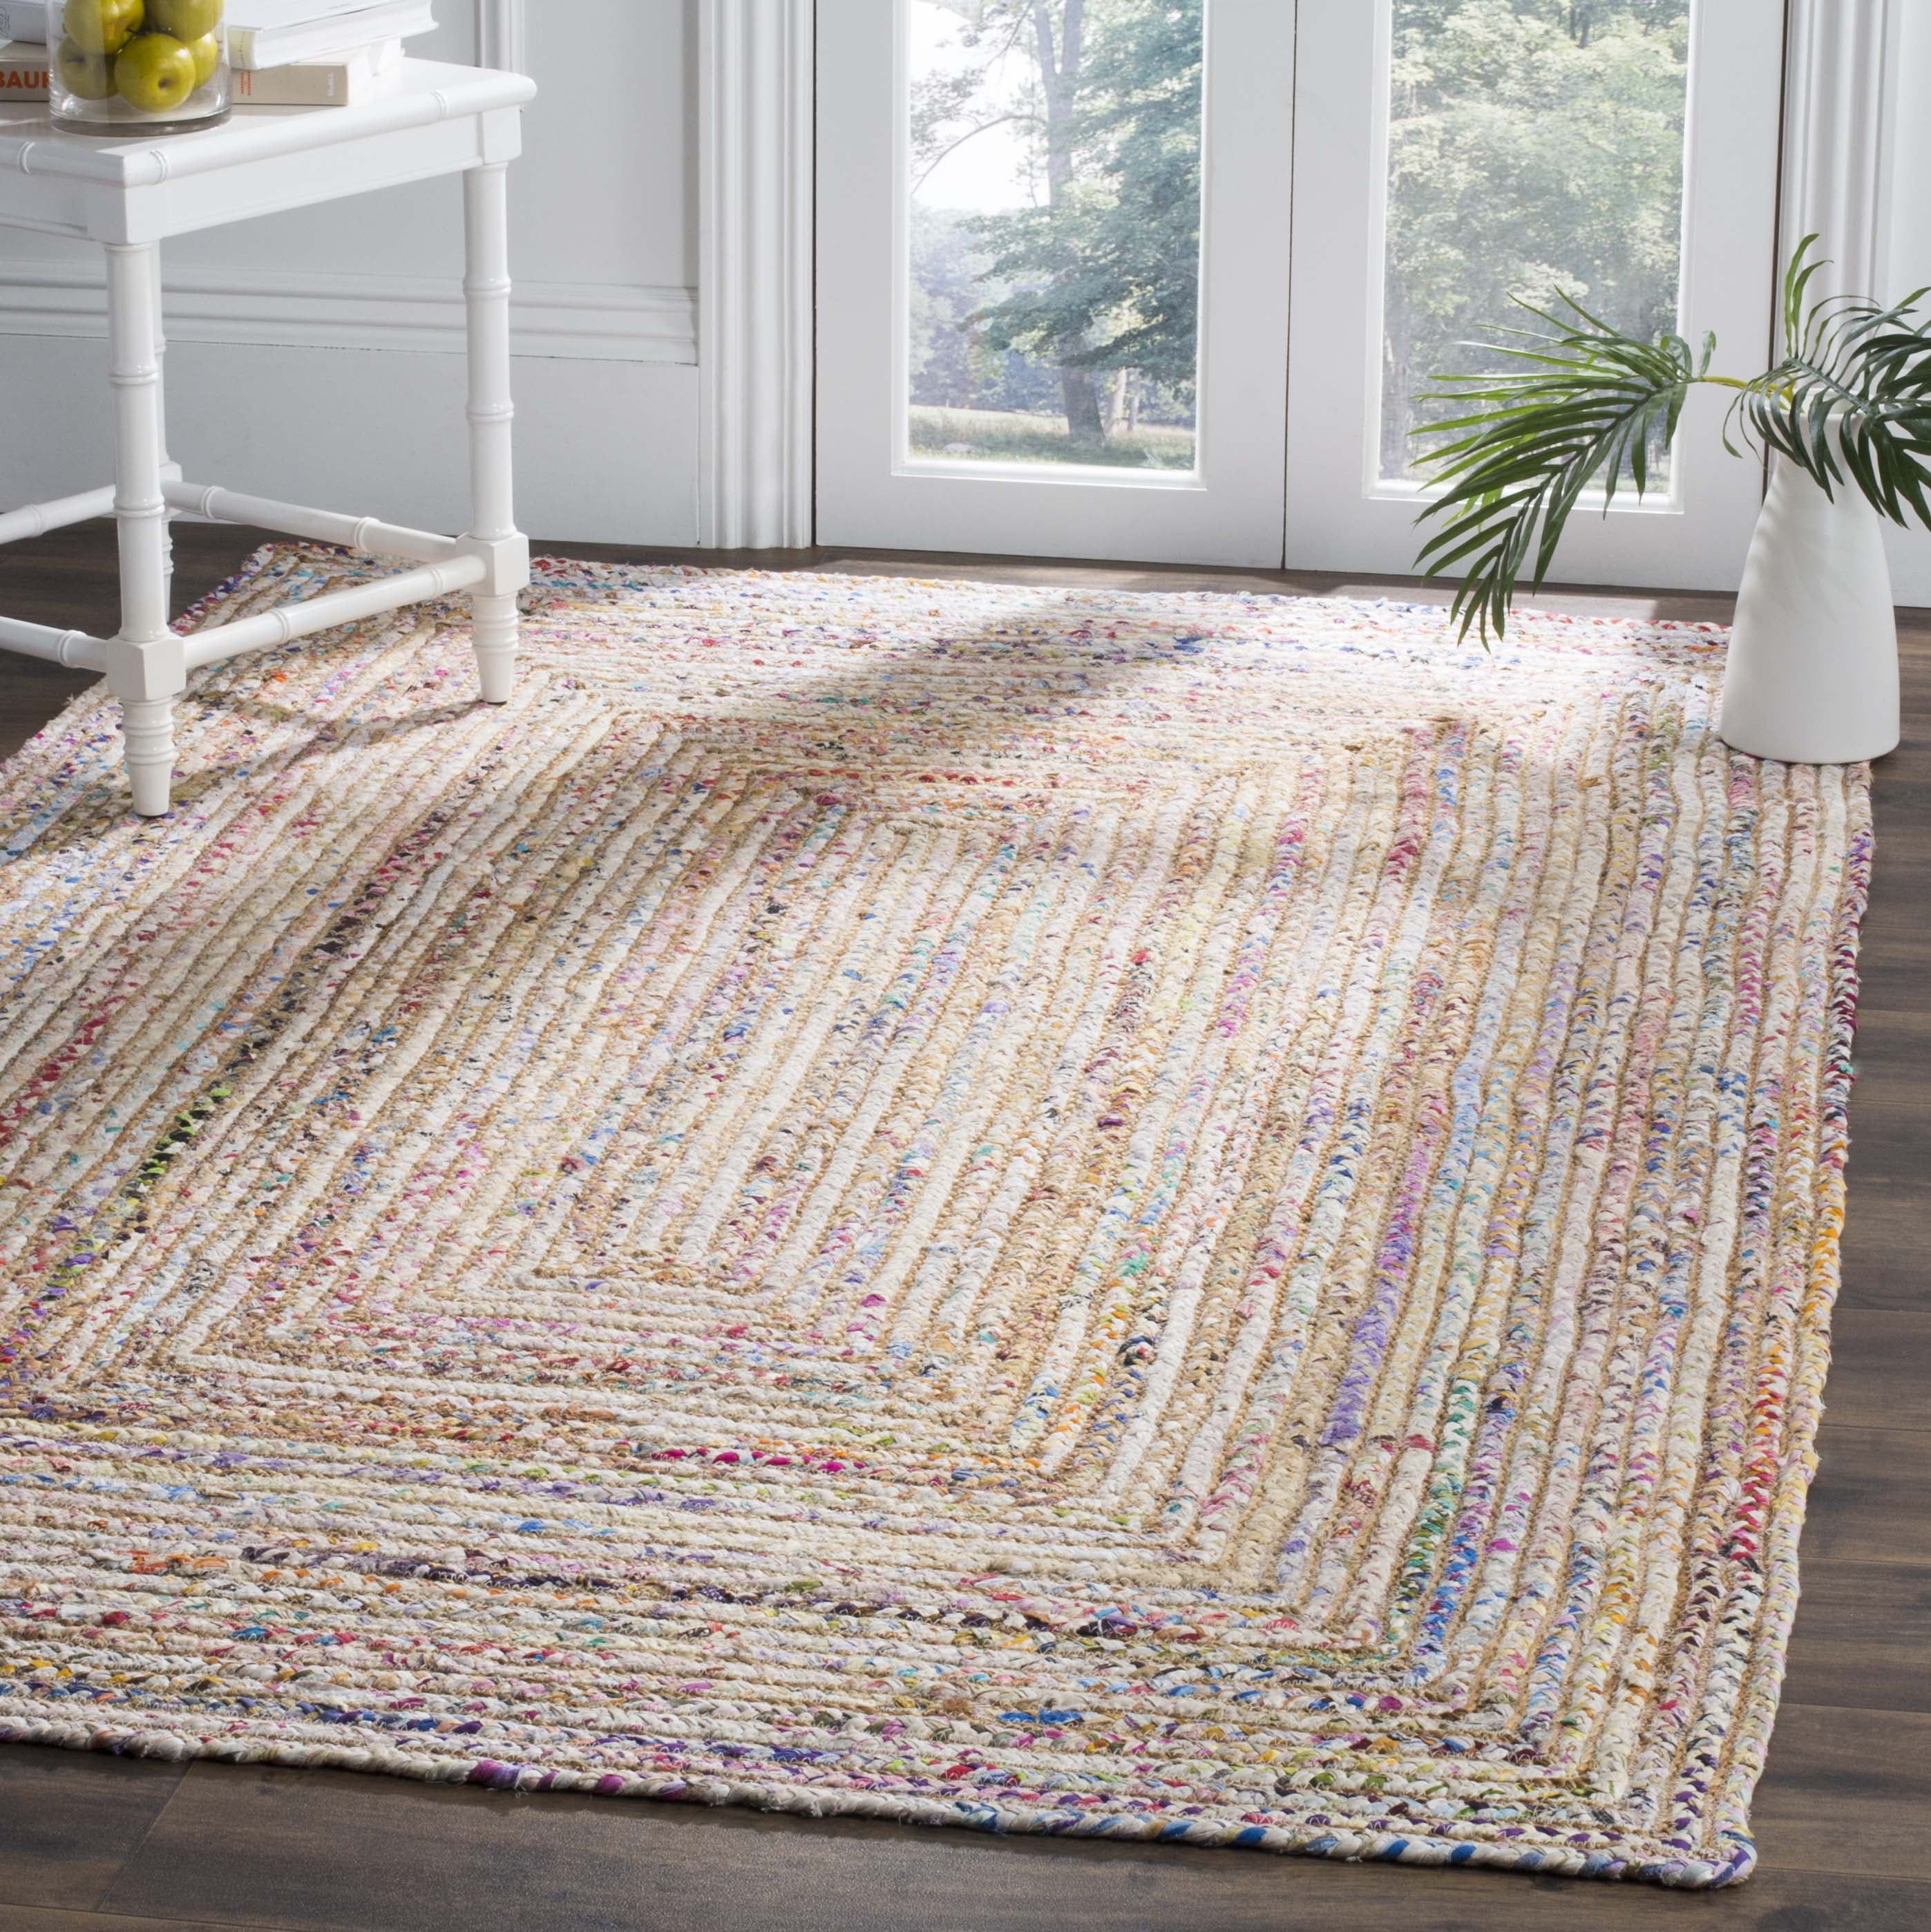 Beige and Multicolor Handmade Cotton Braided Area Rug 9' x 12'